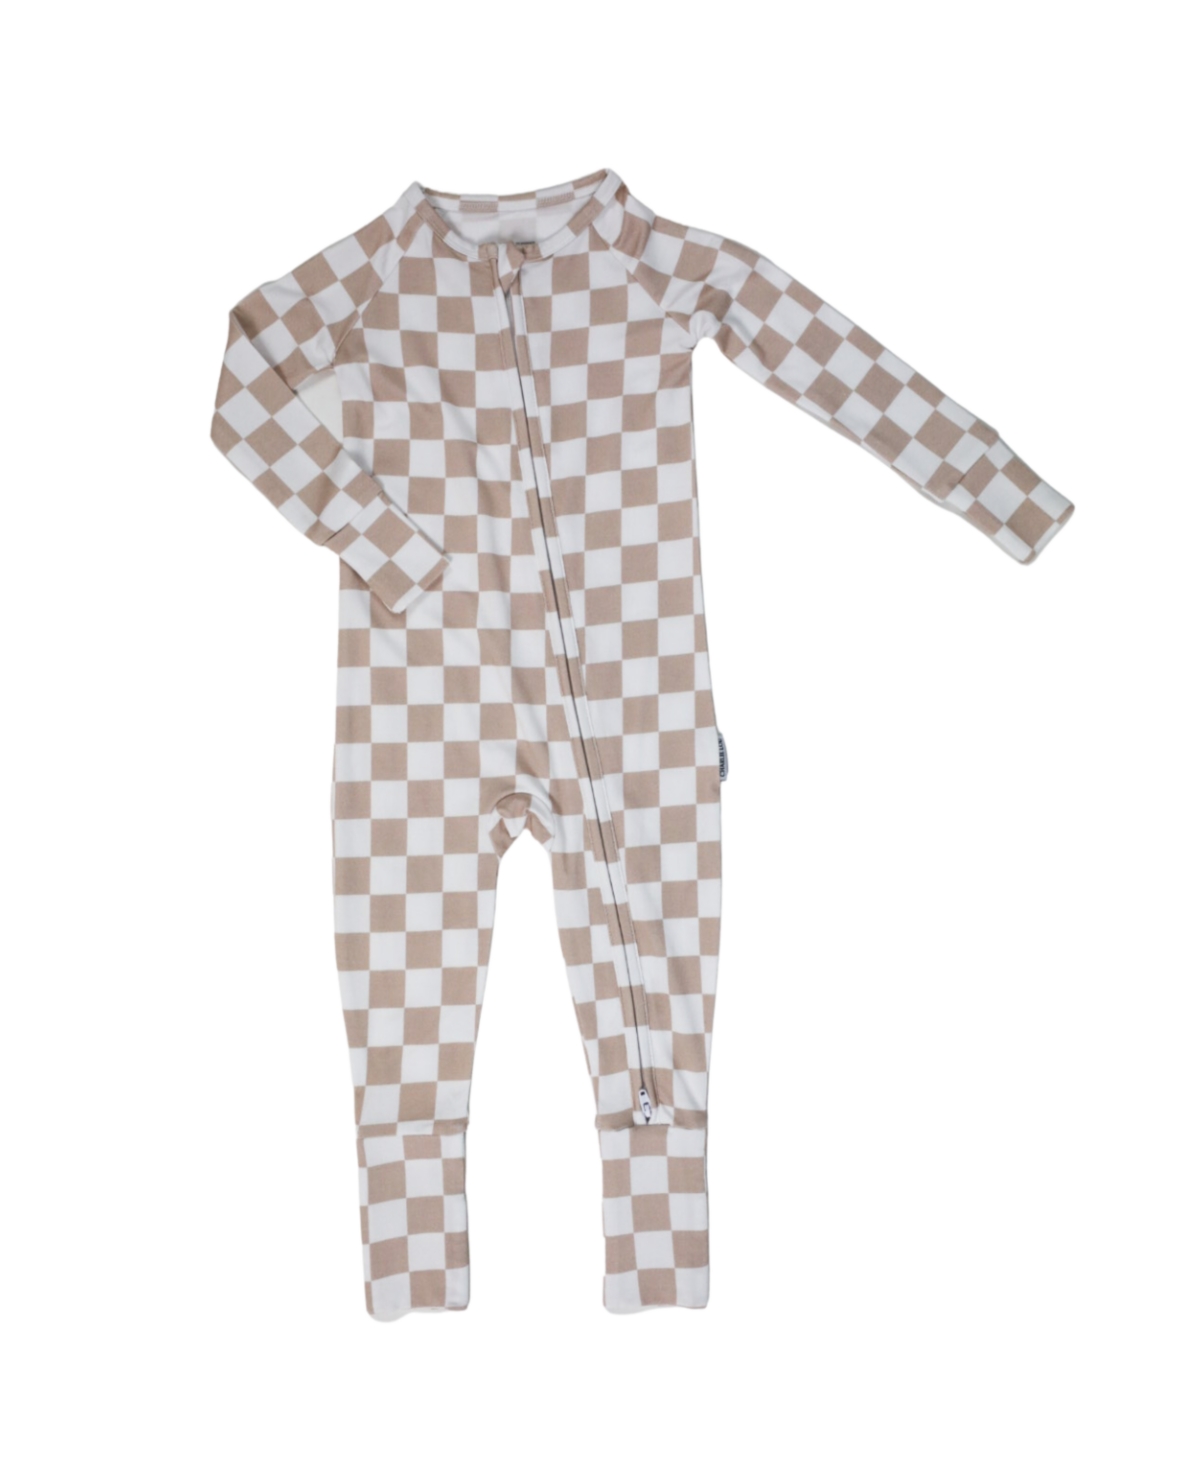 Charlie Lou Baby Unisex Checkered Romper - Baby In Checkered Multicolor